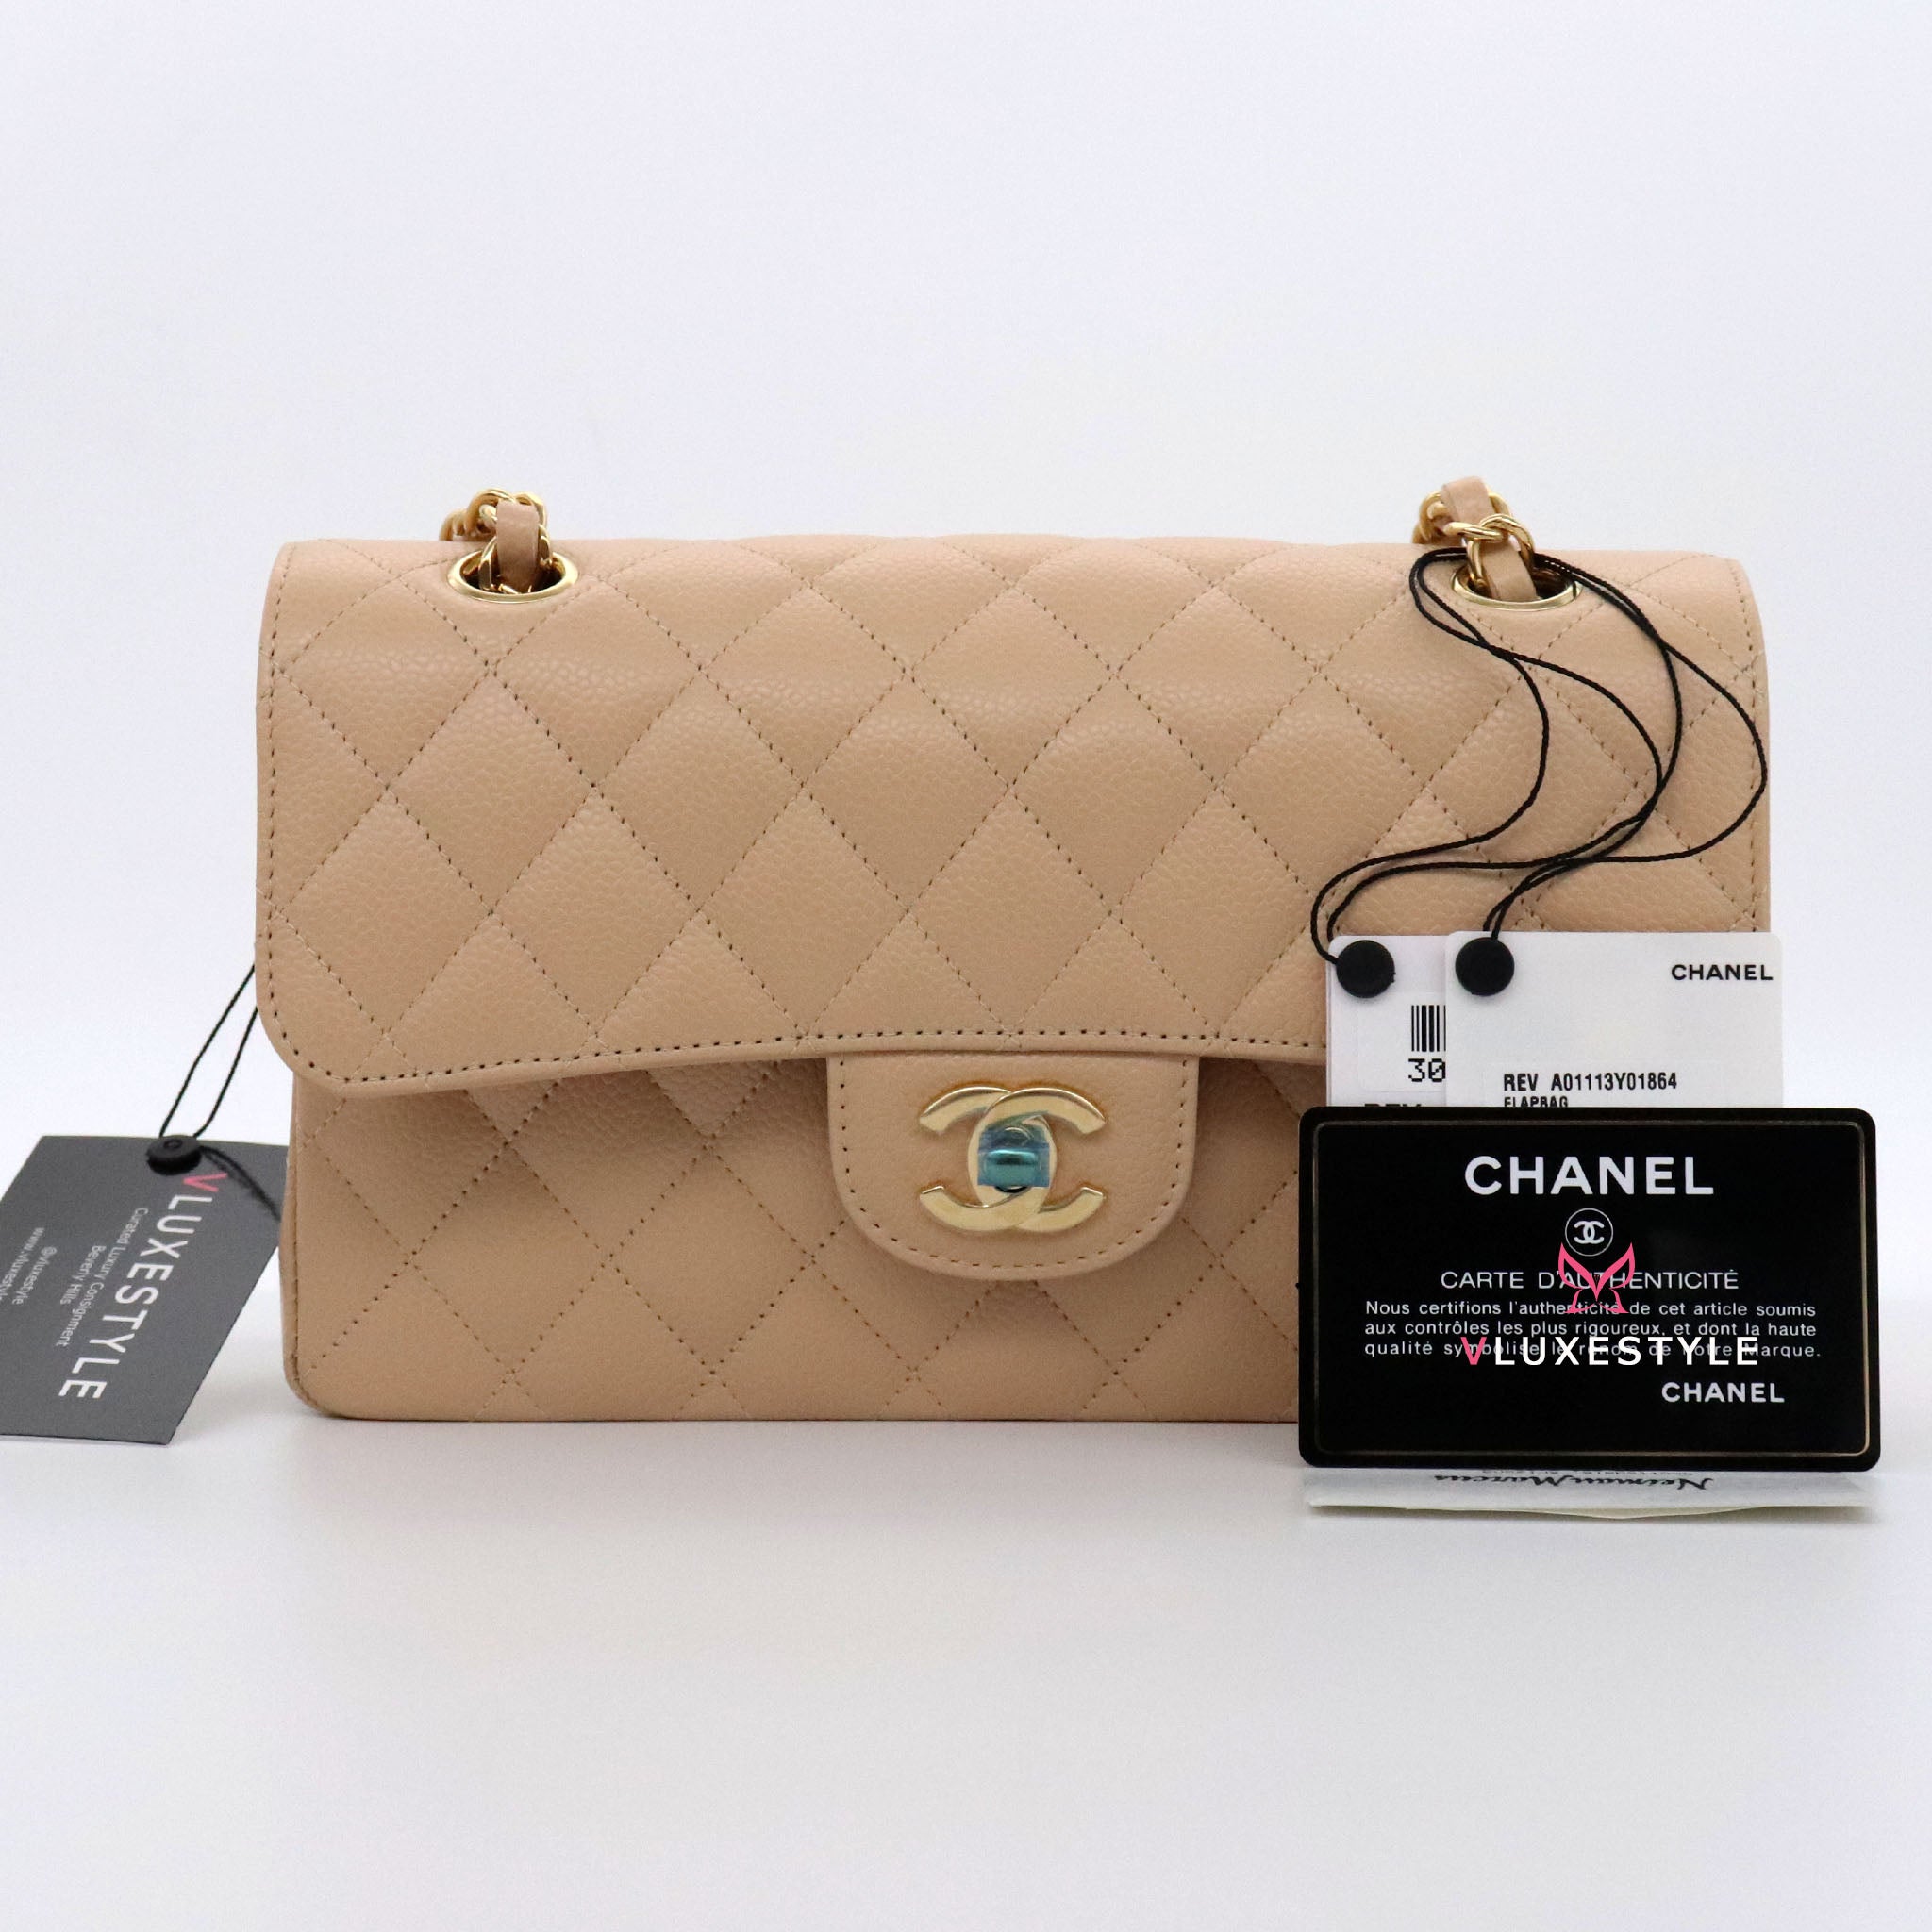 20% Non-refundable deposit to reserve: Chanel Classic Small Double